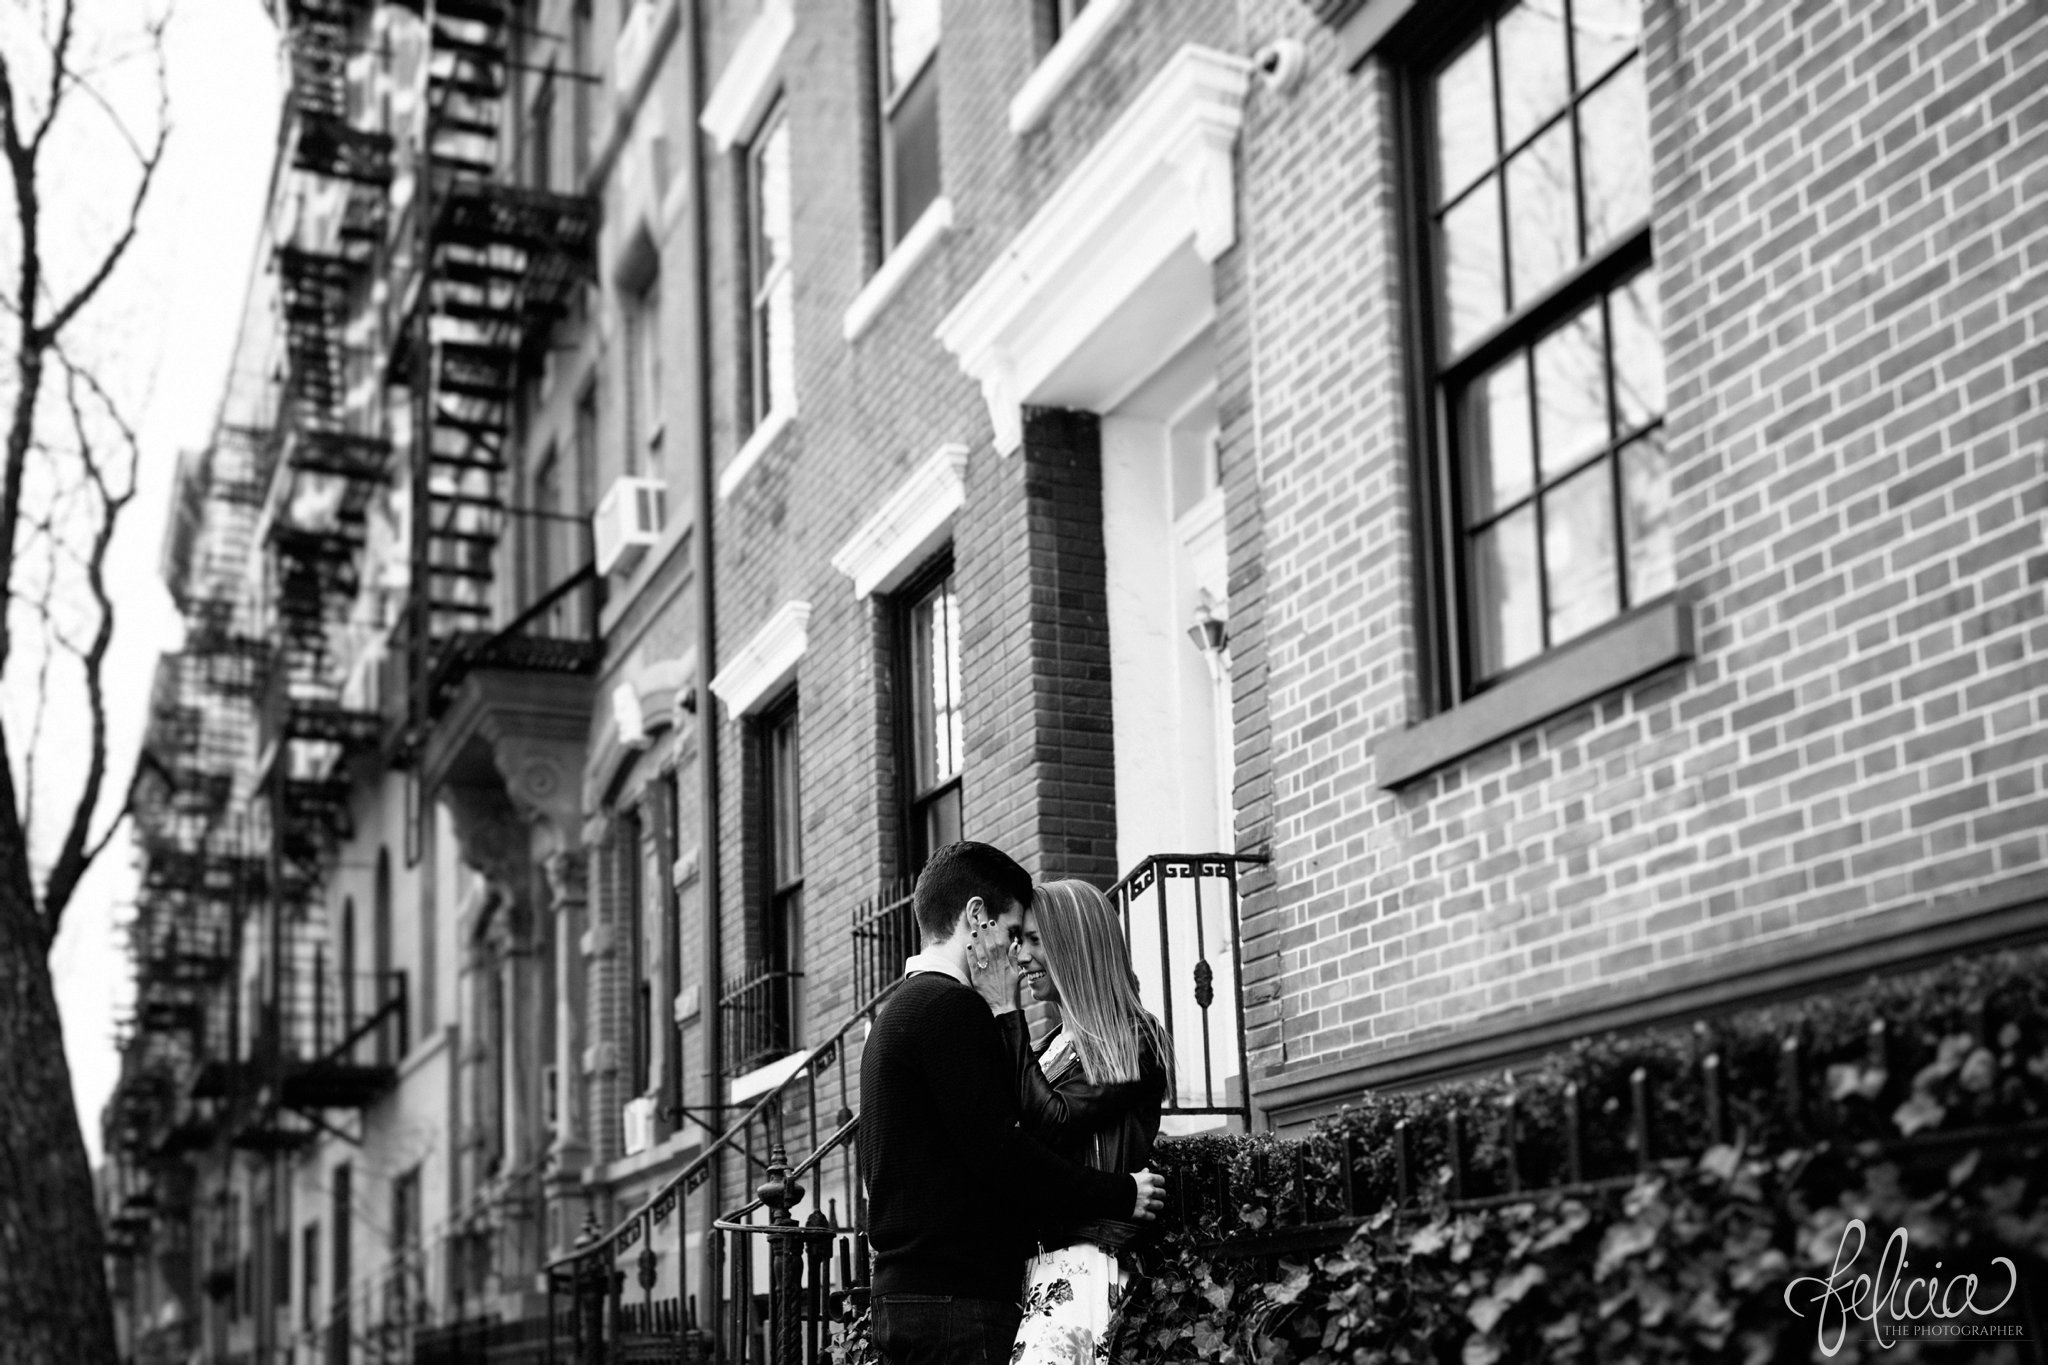 wedding | New York City | West Village | New York City photography | wedding photography | images by feliciathephotographer.com | engagement photos | engagement pictures in New York City | candid | romantic engagement pictures | black and white | New York City brickstones